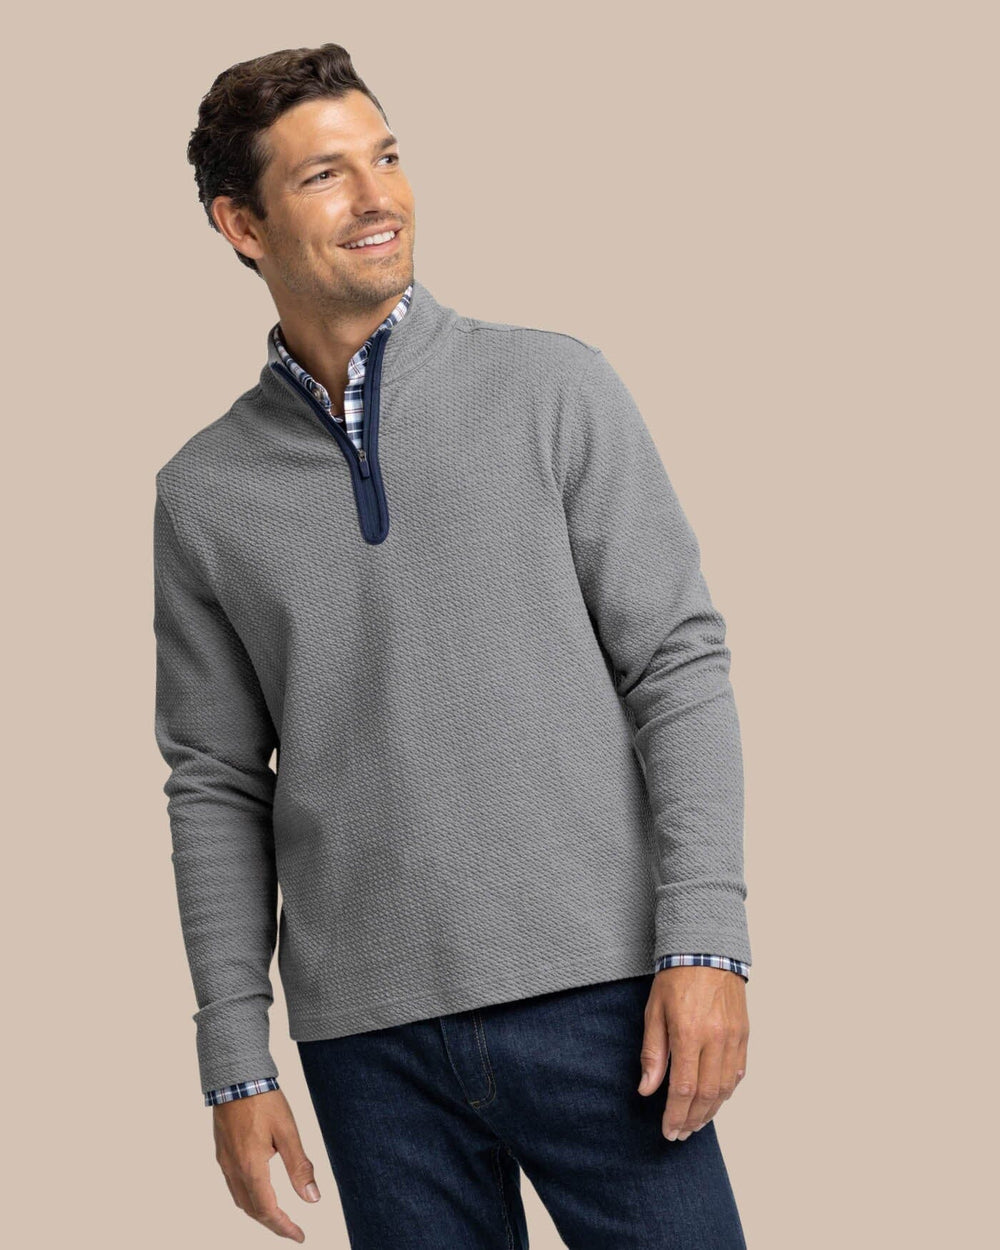 The front view of the Southern Tide Heather Outbound Quarter Zip by Southern Tide - Heather Shadow Grey